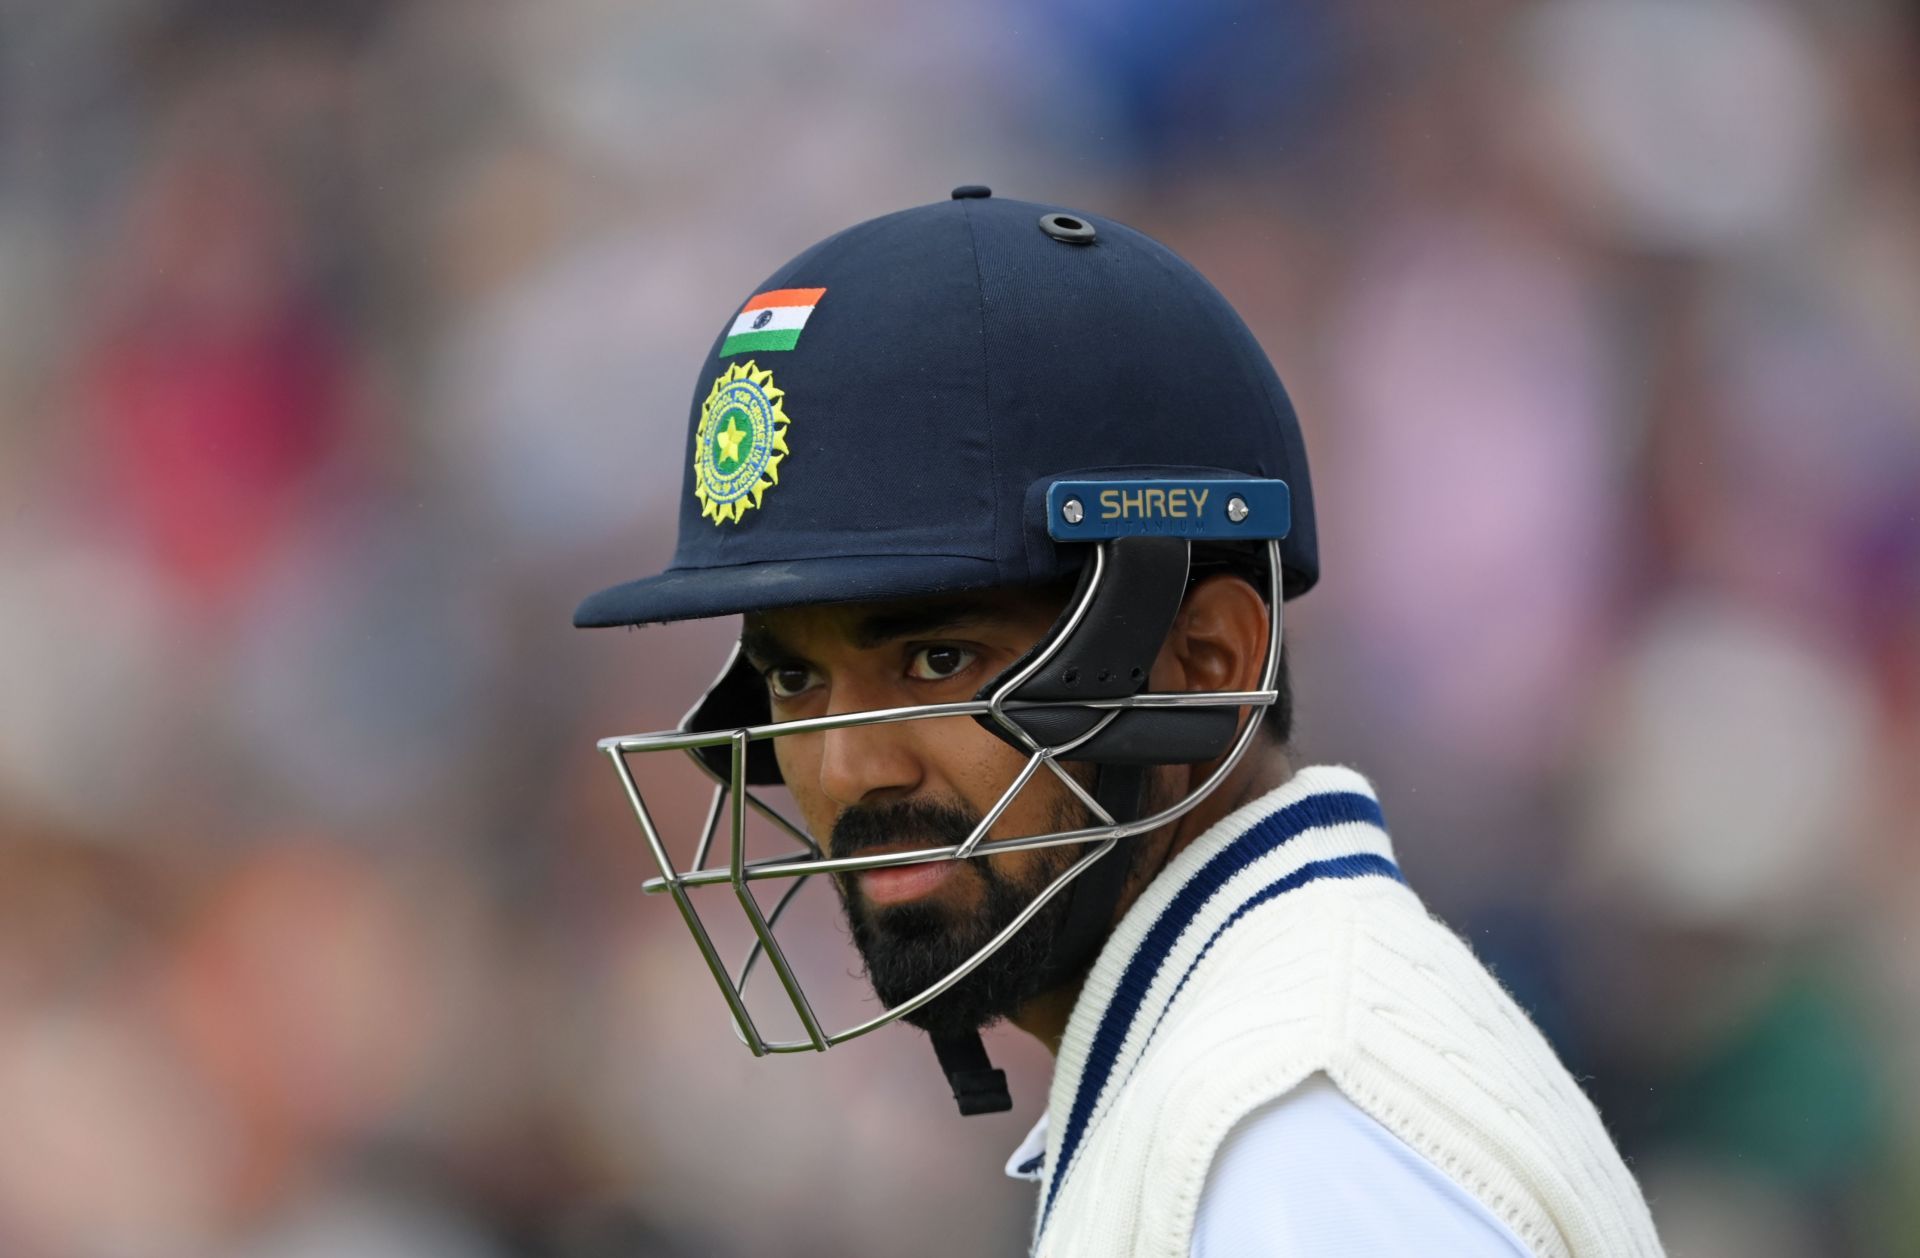 KL Rahul had a dismal tour of South Africa in 2018